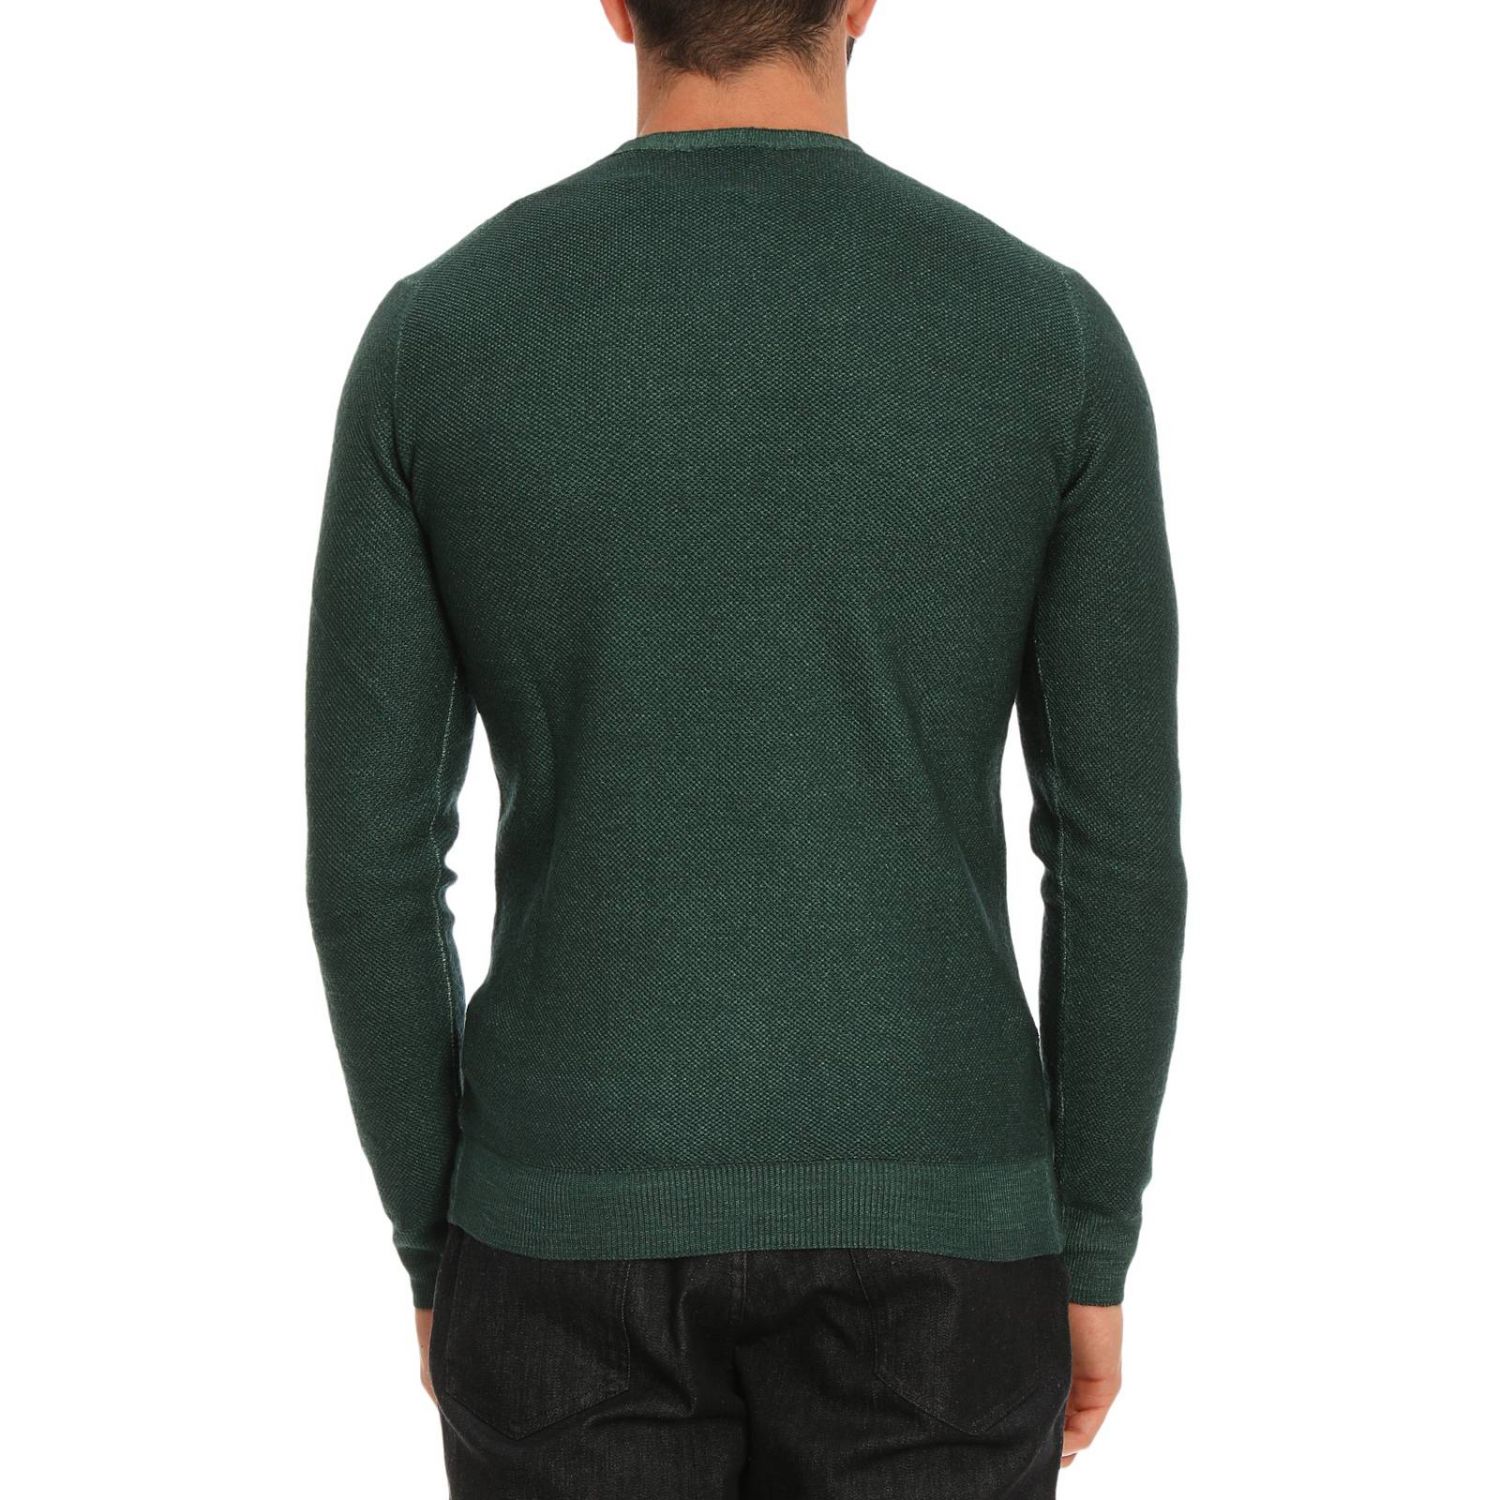 Paolo Pecora Outlet: Sweater men - Green | Sweater Paolo Pecora A029 ...